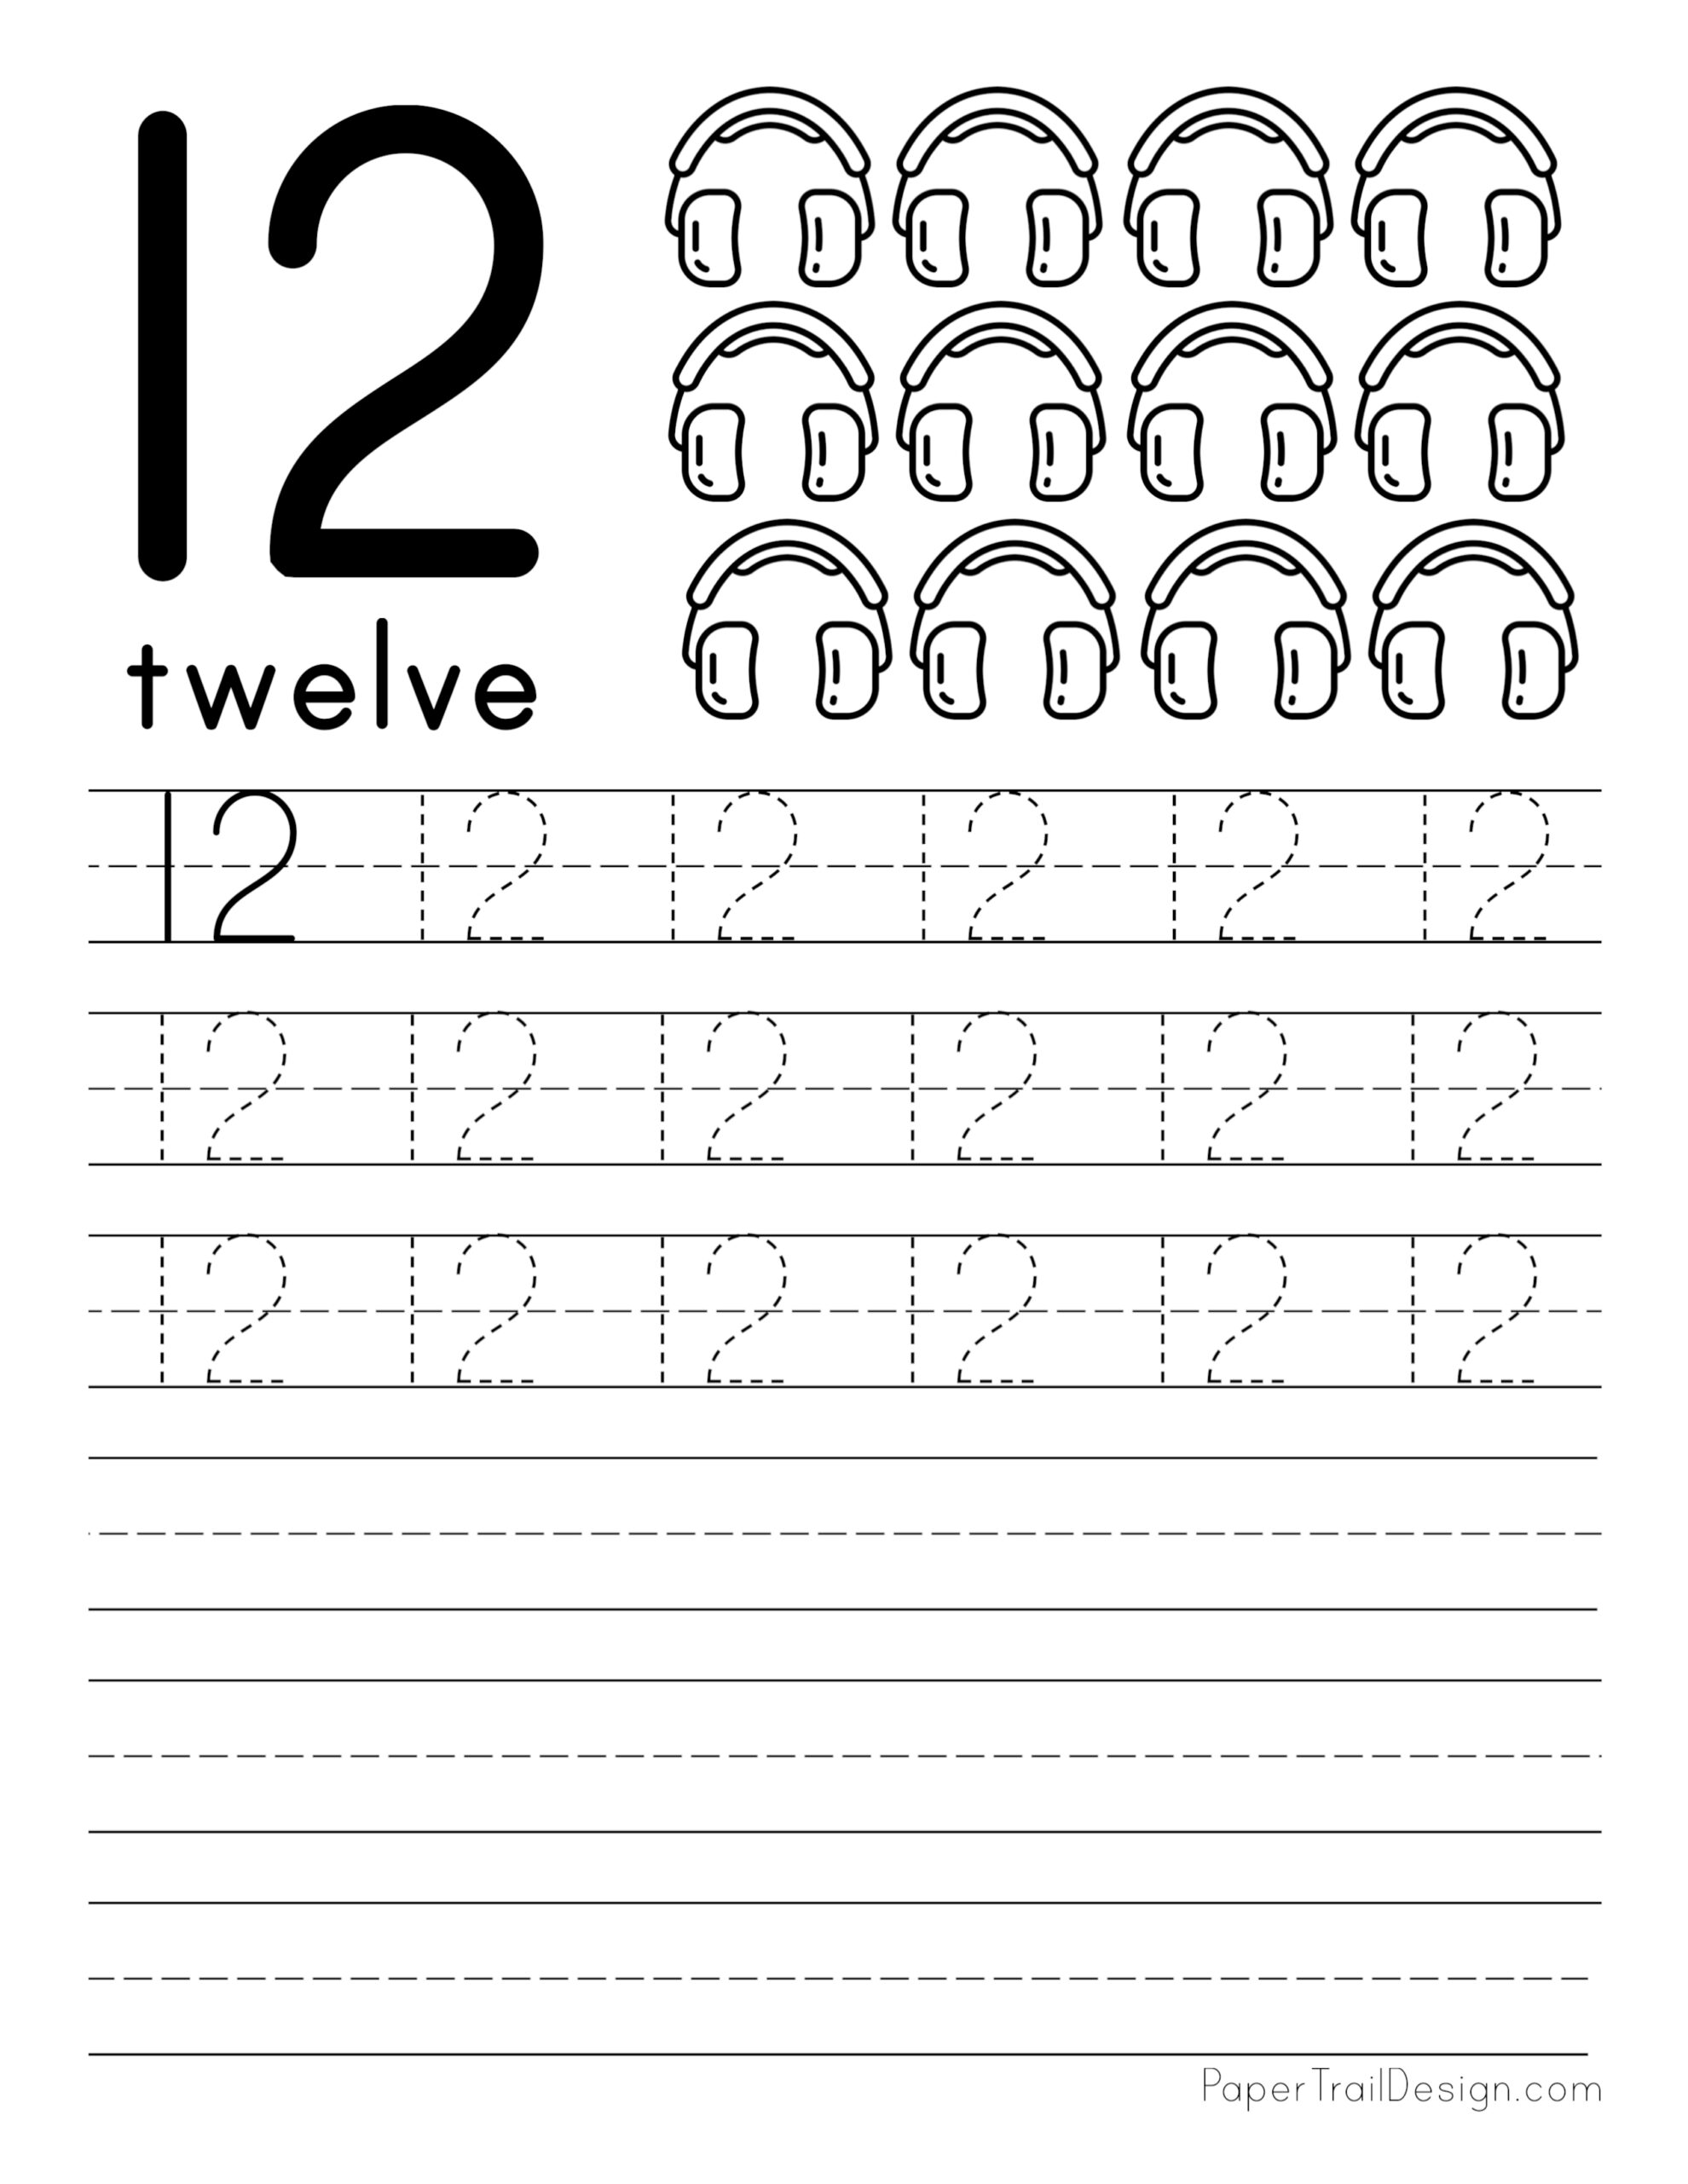 counting-shapes-worksheets-the-teaching-aunt-shapes-worksheets